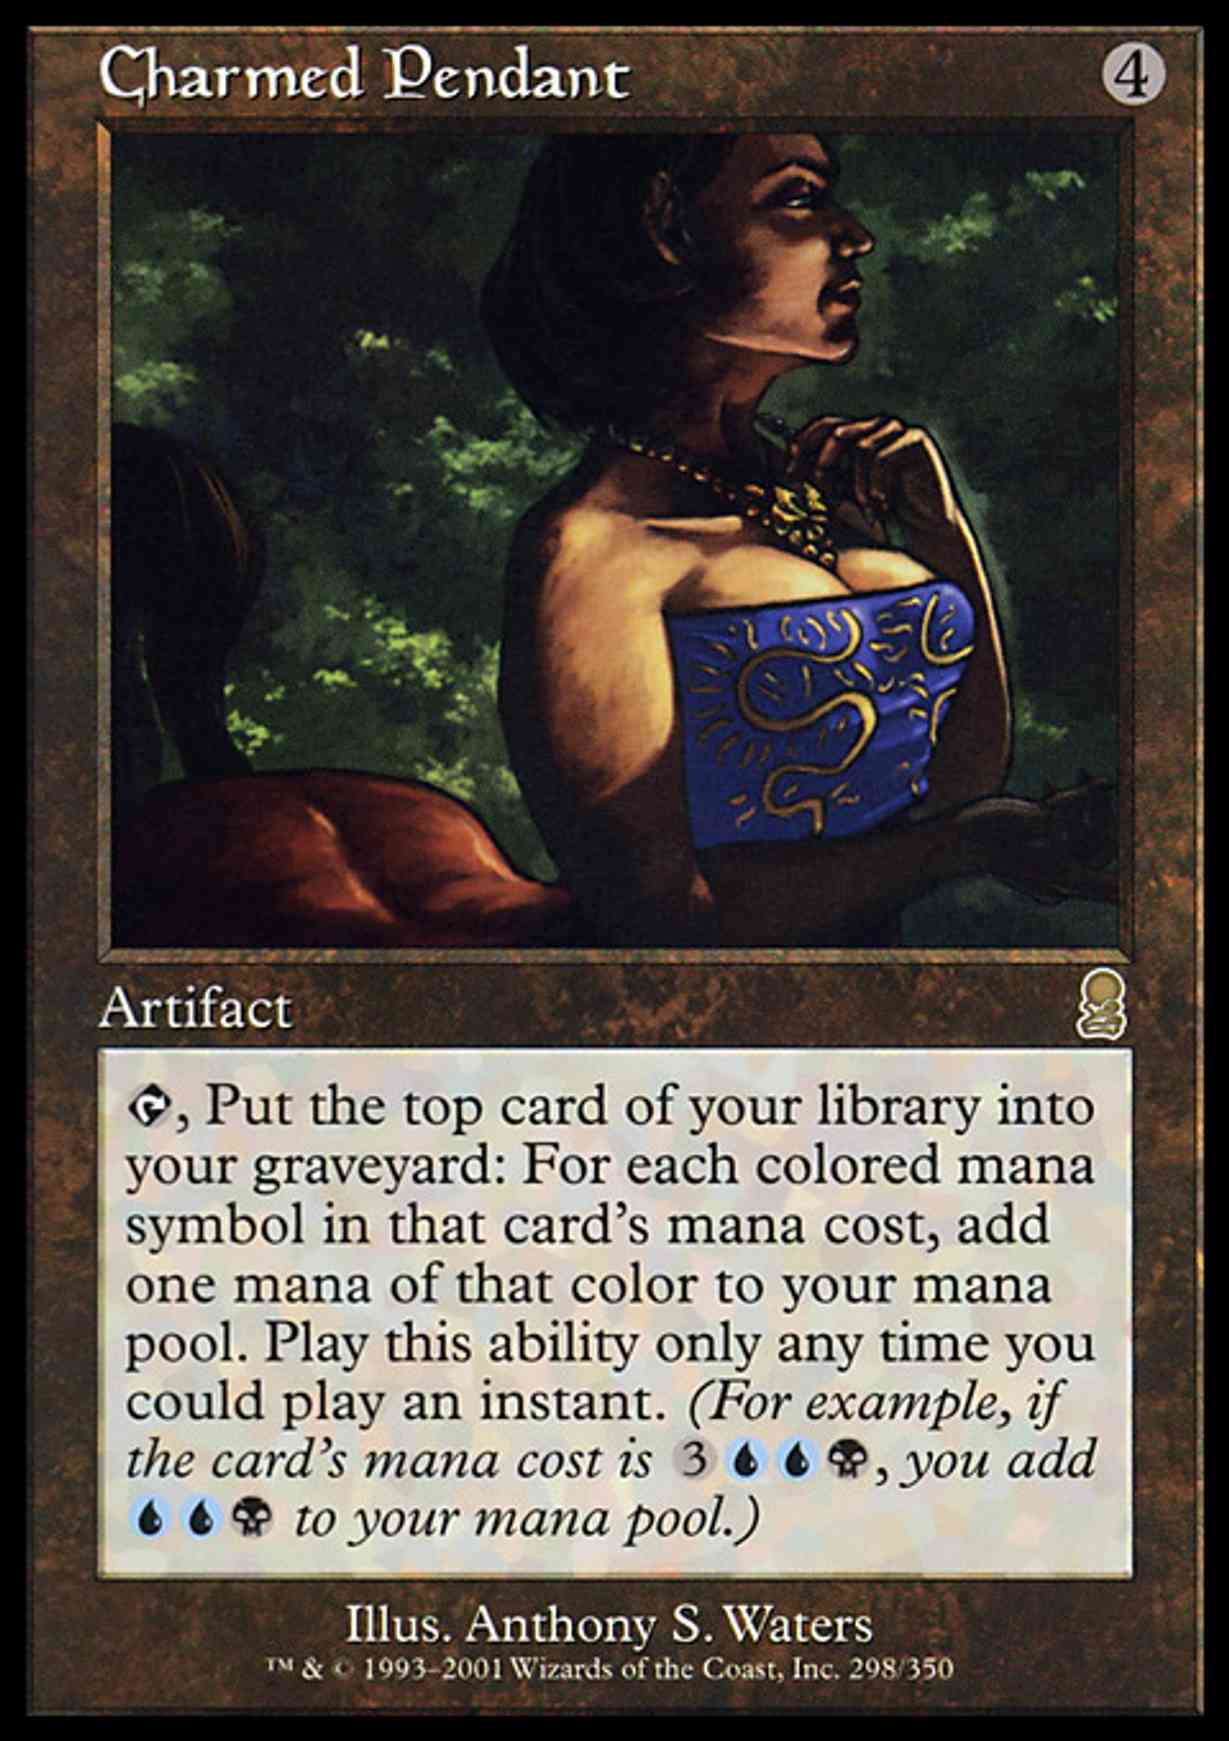 Charmed Pendant magic card front